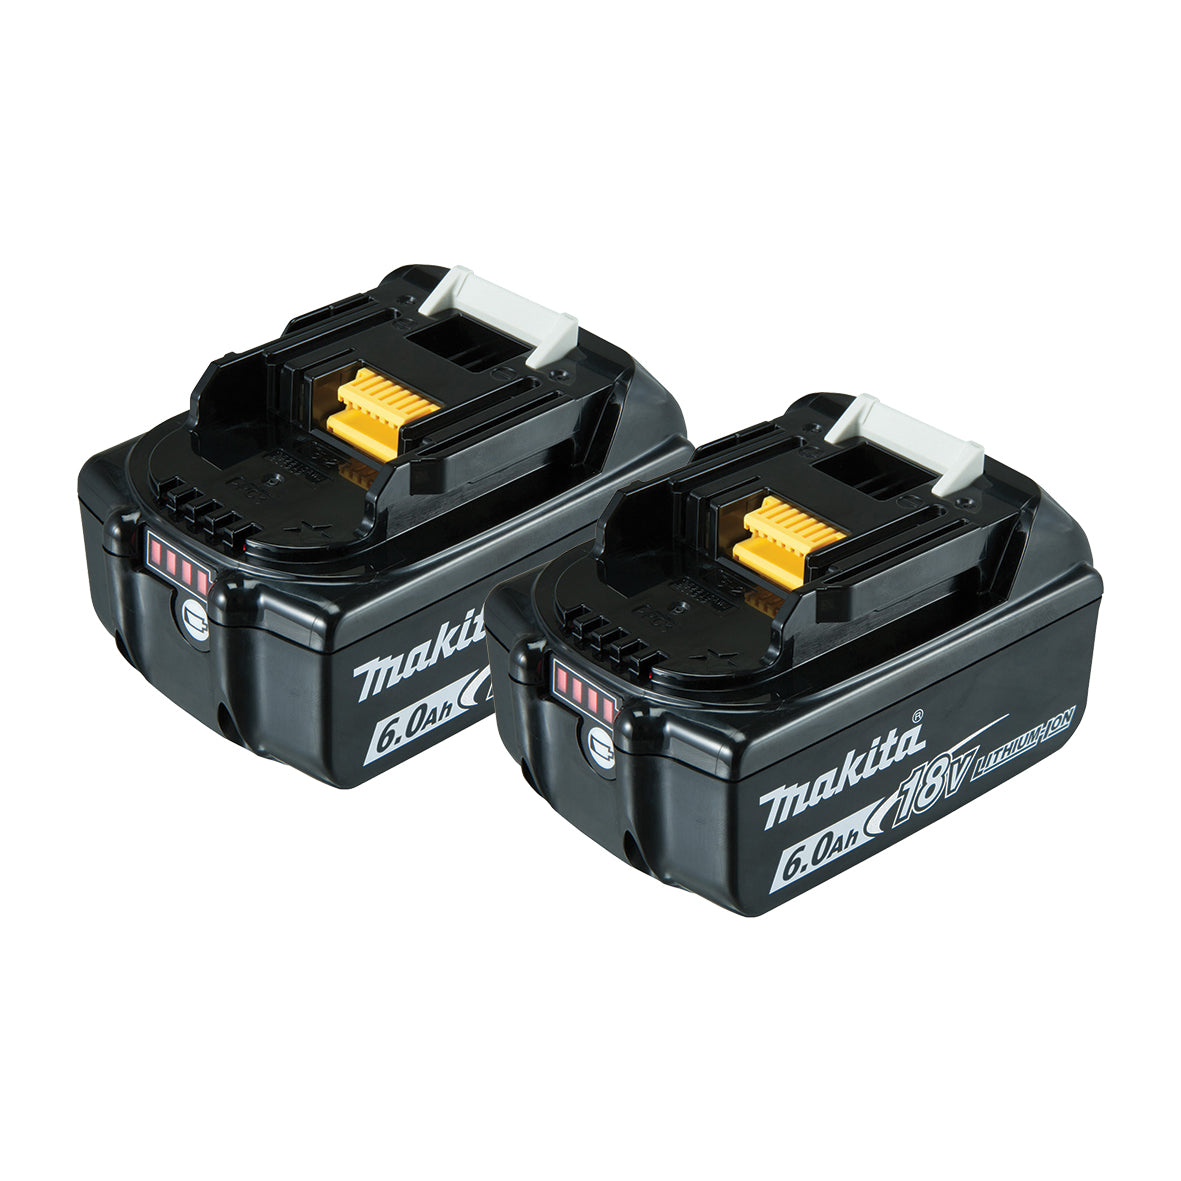 18V 6.0Ah Li-Ion Battery with Light Indicator Twin Pack 198490-0 by Makita